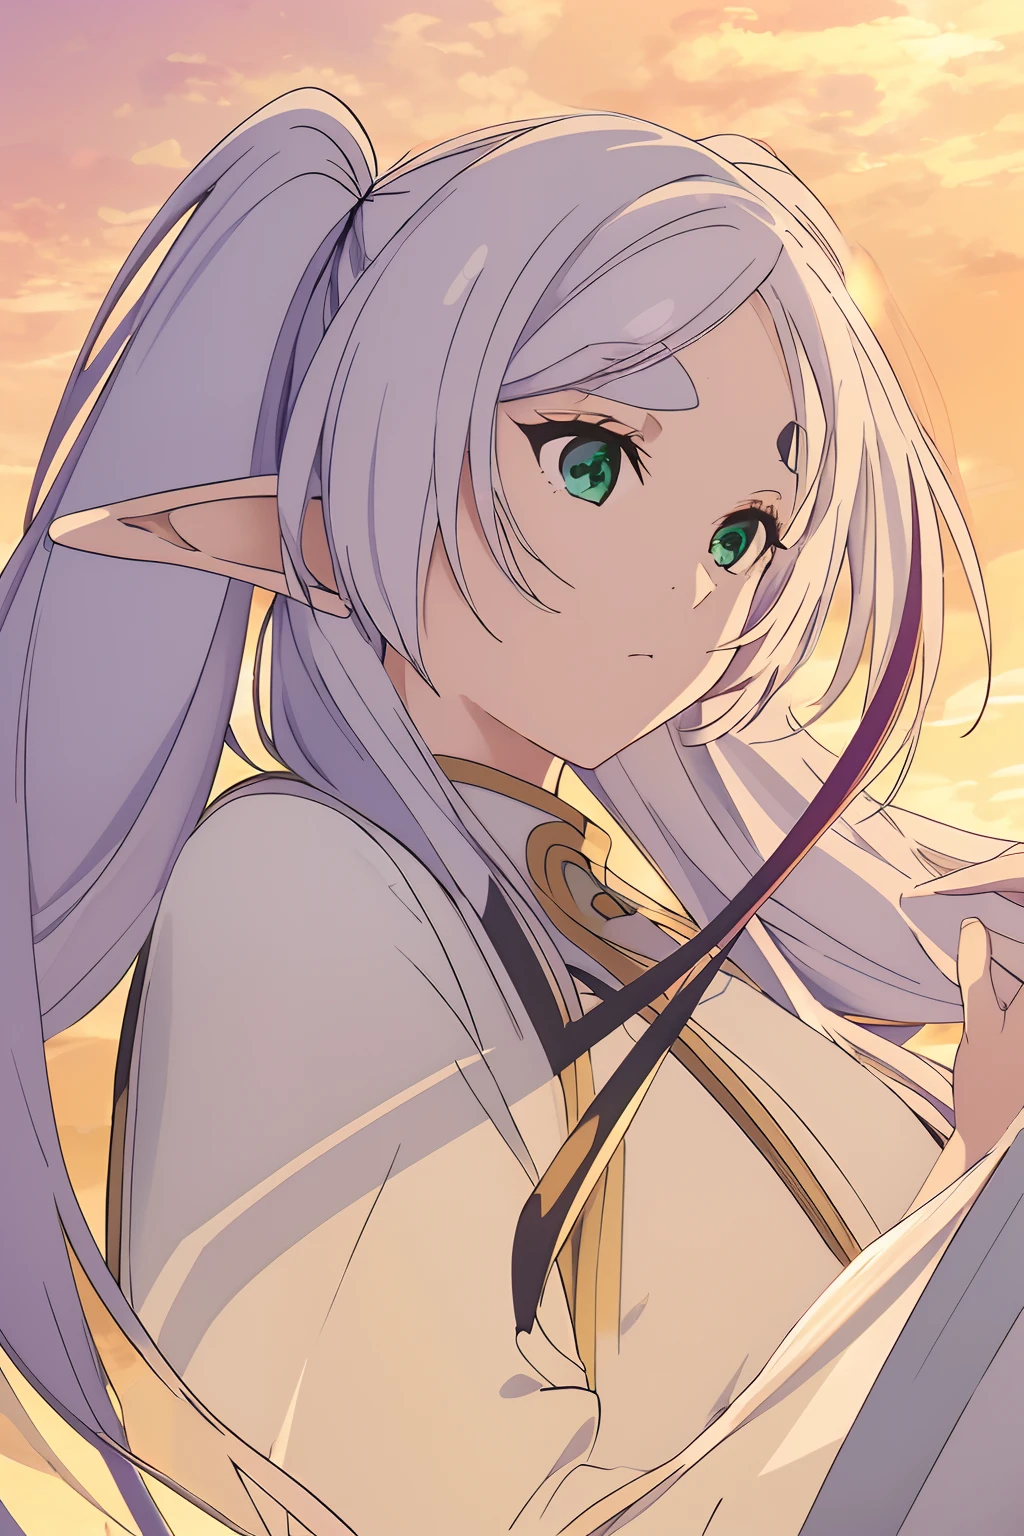 èèè®,1 Elf Girl,Twin tails with gray hair、White robes and skirts、Black tights、Brown boots,Green eyes,Parted bangs,Thick eyebrows,Beautiful Finger,Beautiful character design,  Official art,Highly detailed CG Unity 8K wallpaper, Perfect Lighting,Colorful, Bright_front_Face_Lighting,Shiny skin, (masutepiece:1.0),(best_quality:1.0), 超A high resolution,4K,Ultra-detailed, Photography, 8K, nffsw, hight resolution,  Lens Flare,  (Beautiful_Face:1.5),(narrow_waist),  hight resolution,masutepiece,Best Quality, Holding a magician's wand in his hand、Medieval cityscape